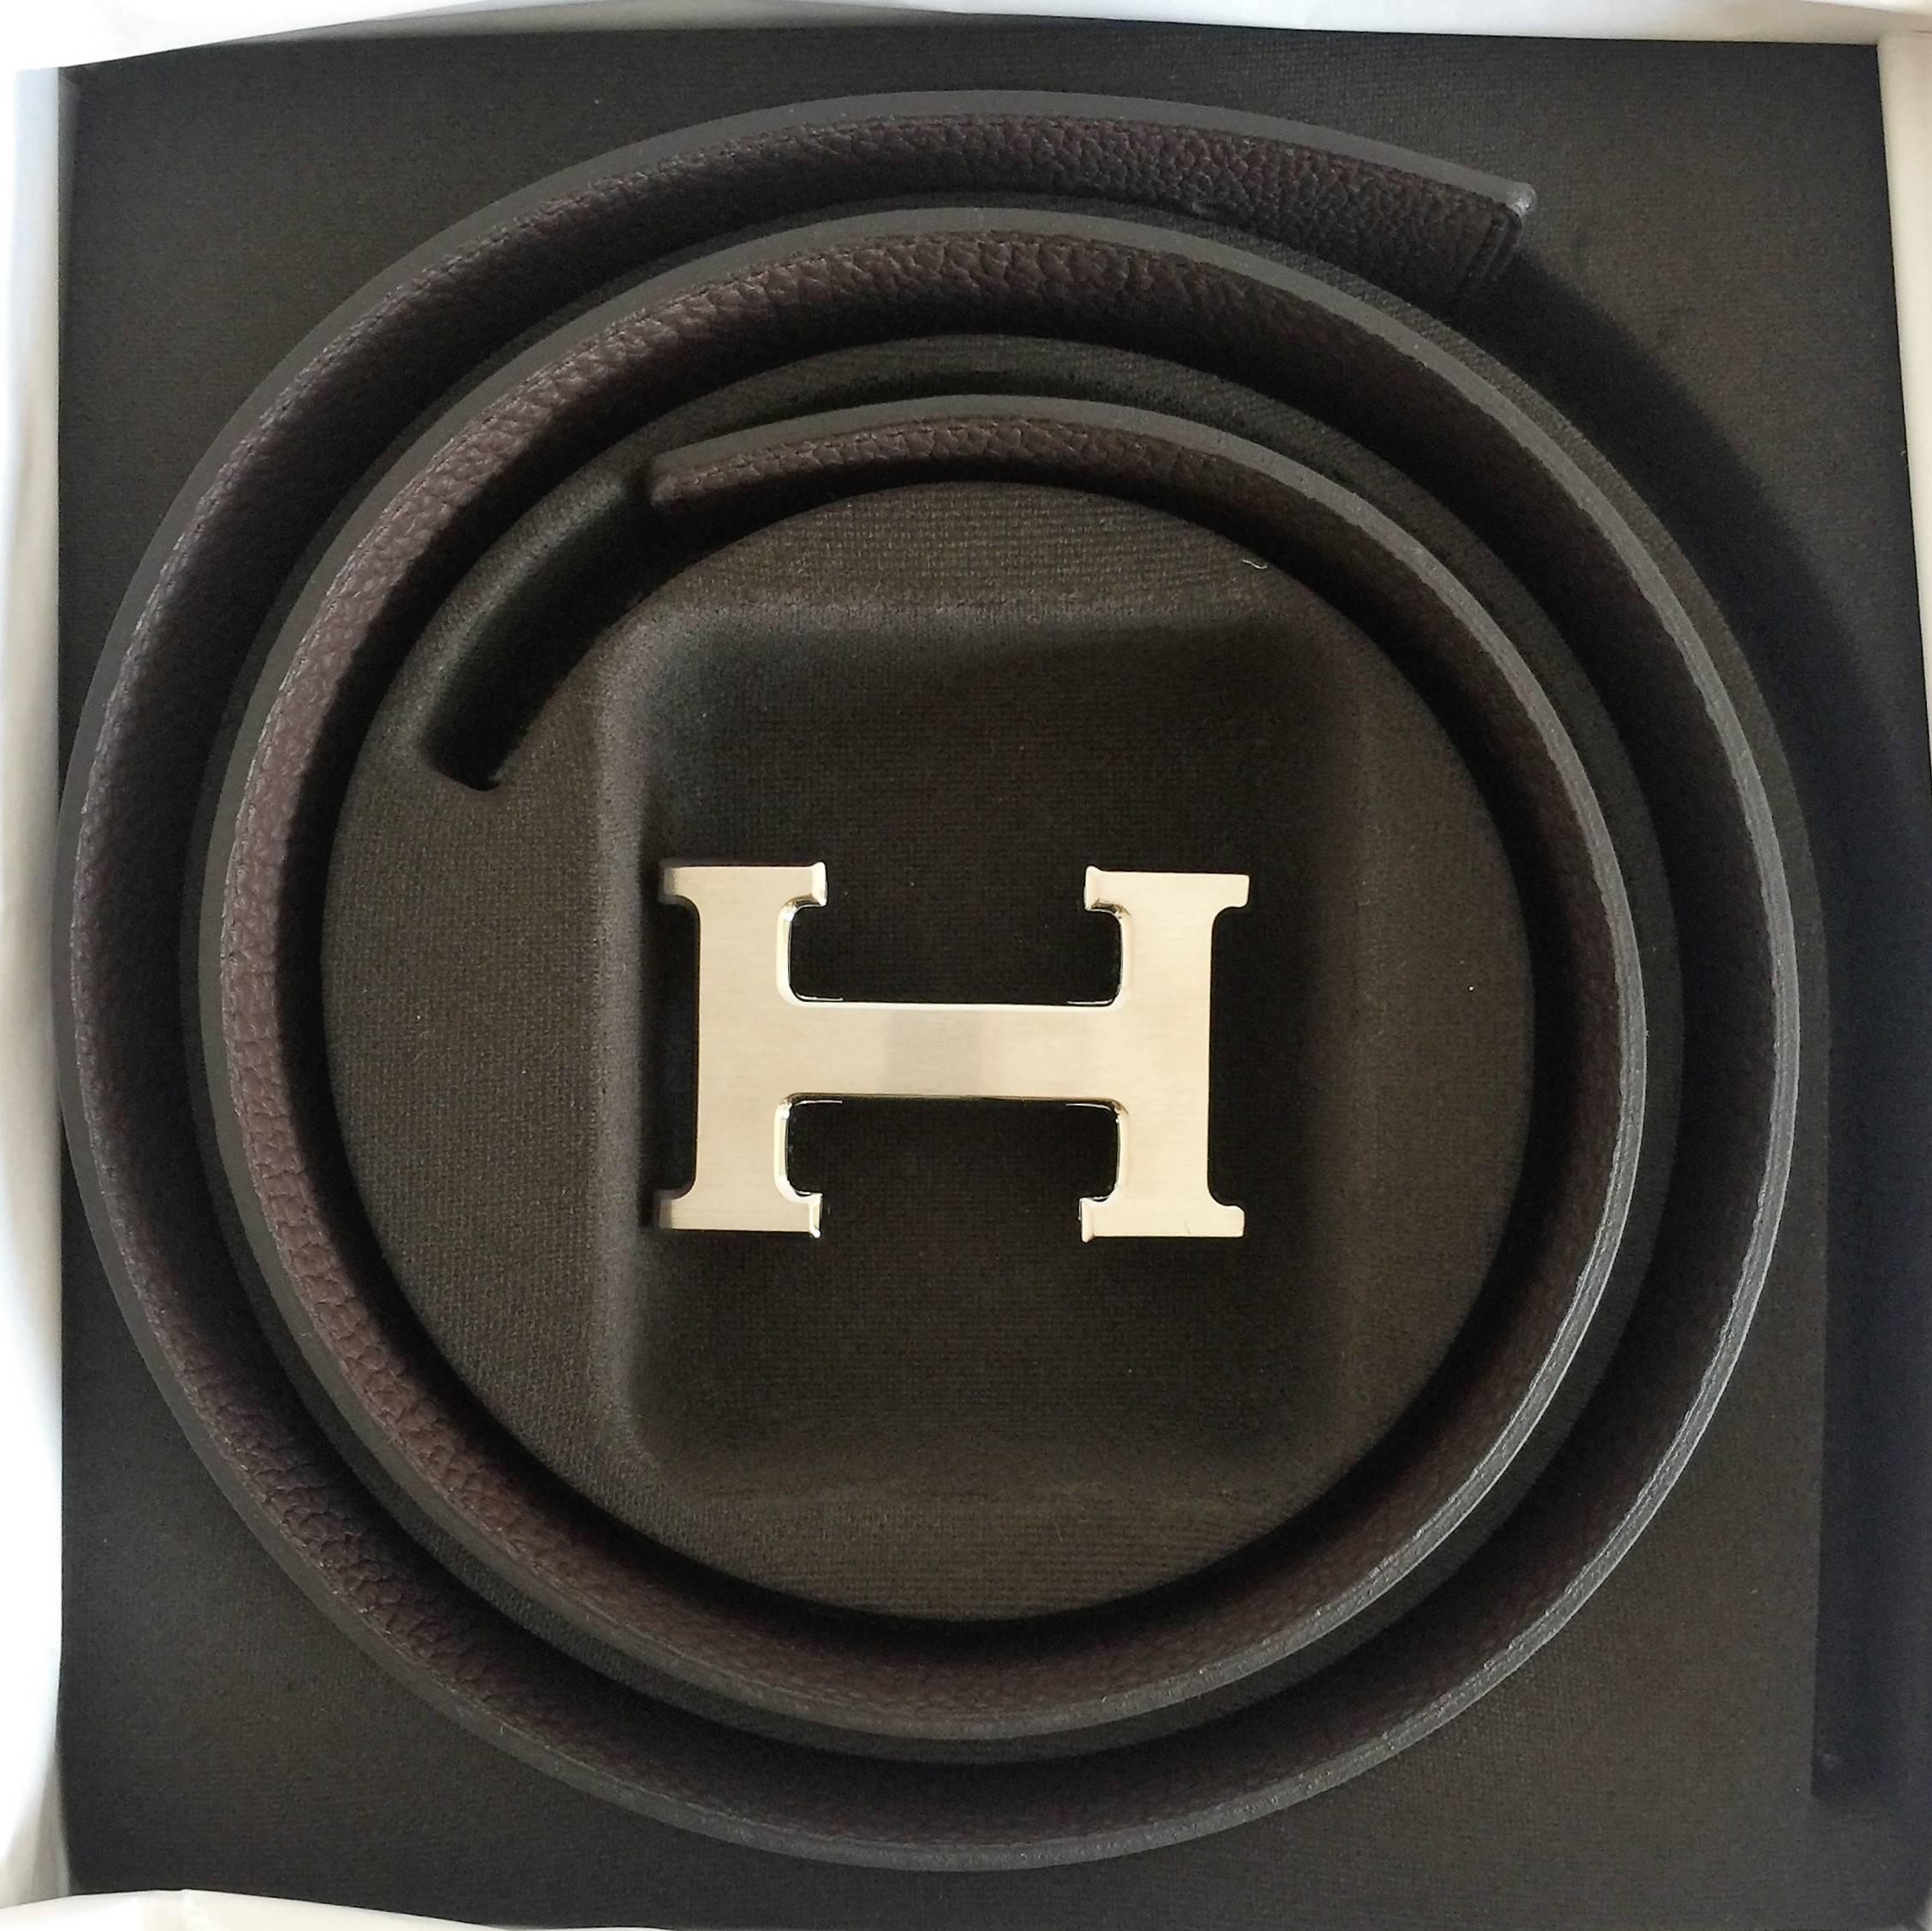 This very elegant Reversible Hermes Leather Belt Kit can be used in both sides:  one side 'Chocolat' colour the other 'Noir'. A brushed silver buckle is included in the kit. The belt has never been worn and it's in new condition.
Strap Size (L x H)